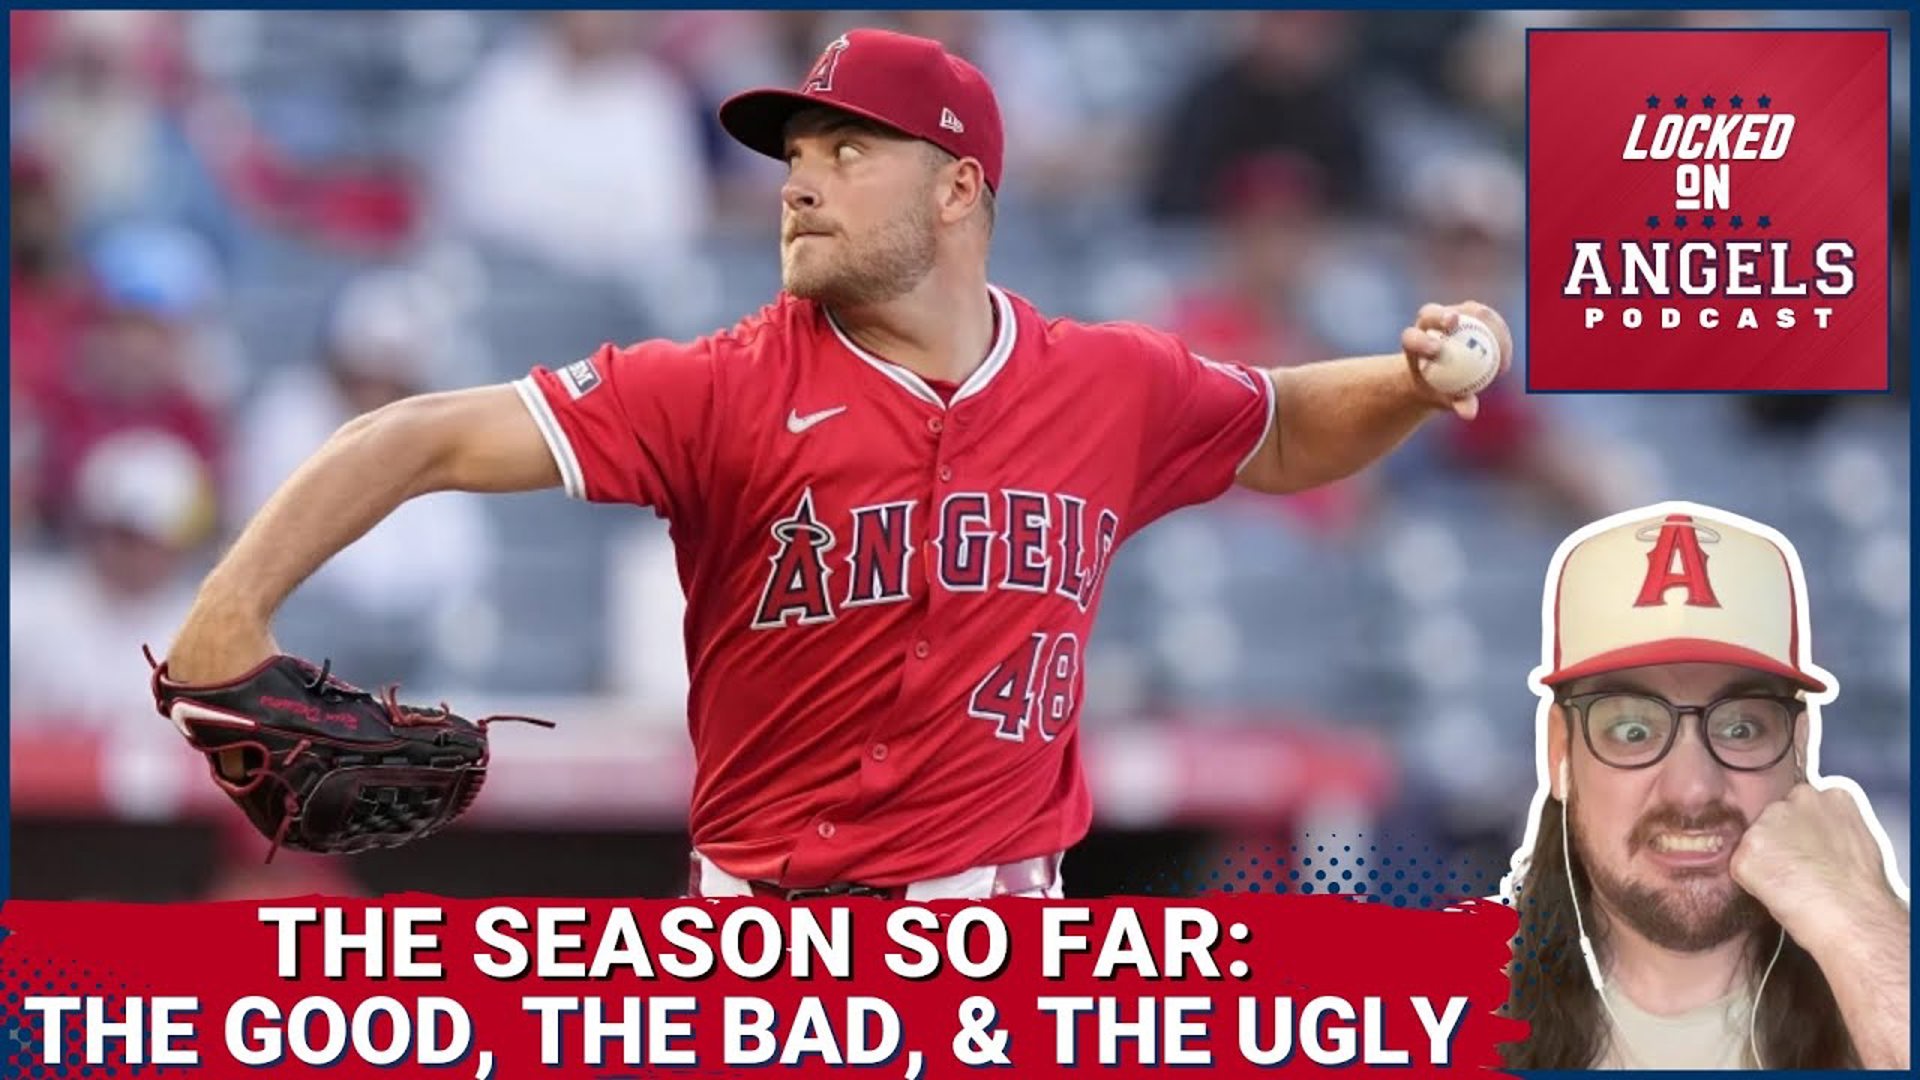 The Los Angeles Angels have not made this season easy on their fans so far, and today on Locked On Angels, we're taking a look at the good, the bad, and the ugly